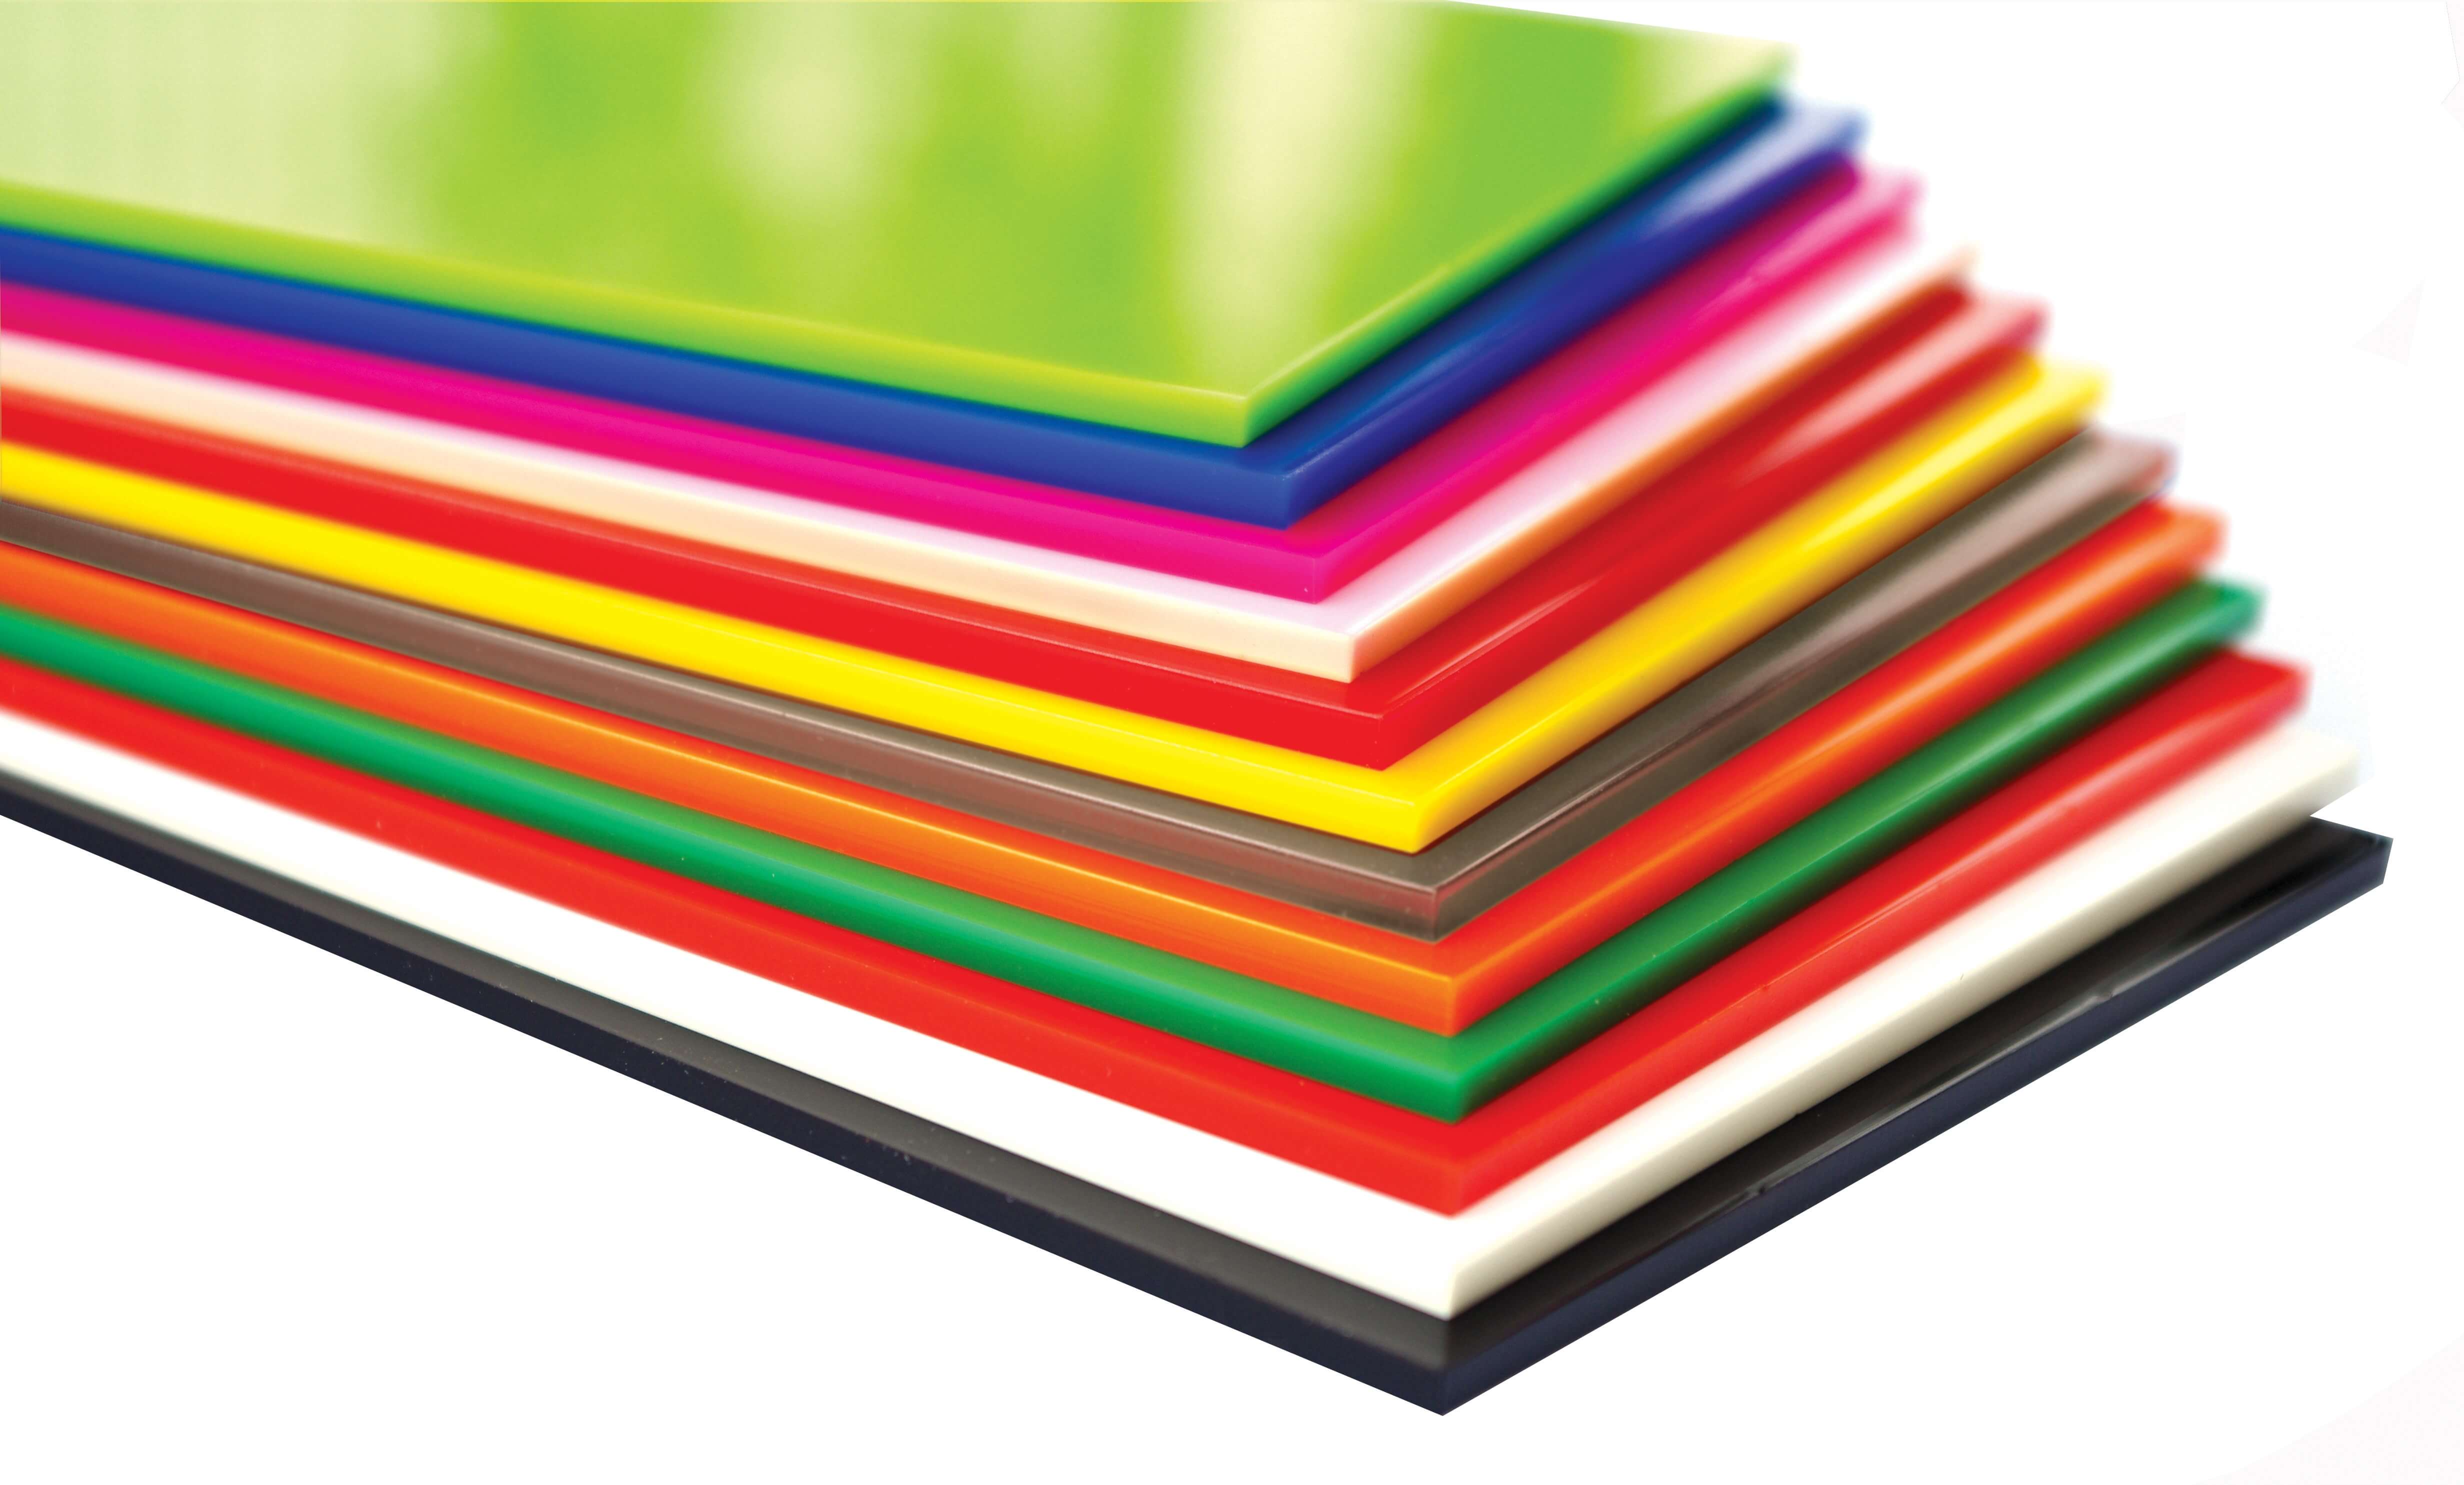 Cast Acrylic 3mm Sheet - Solid 1000 x 600mm Assorted Pack of 12